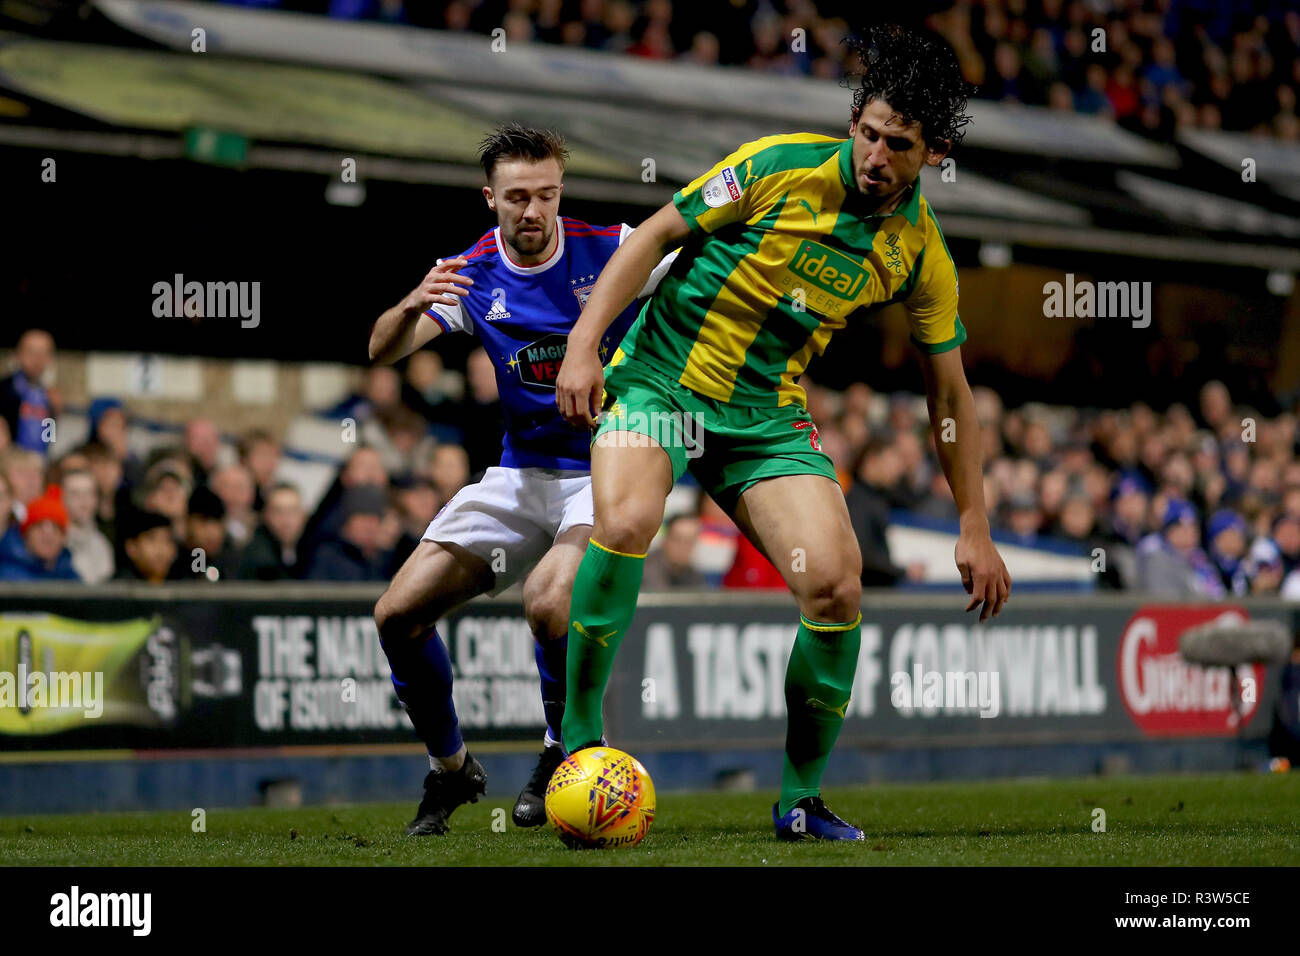 Gwion Edwards of Ipswich Town and Ahmed Hegazy of West Bromwich Albion - Ipswich Town v West Bromwich Albion, Sky Bet Championship, Portman Road, Ipsw Stock Photo